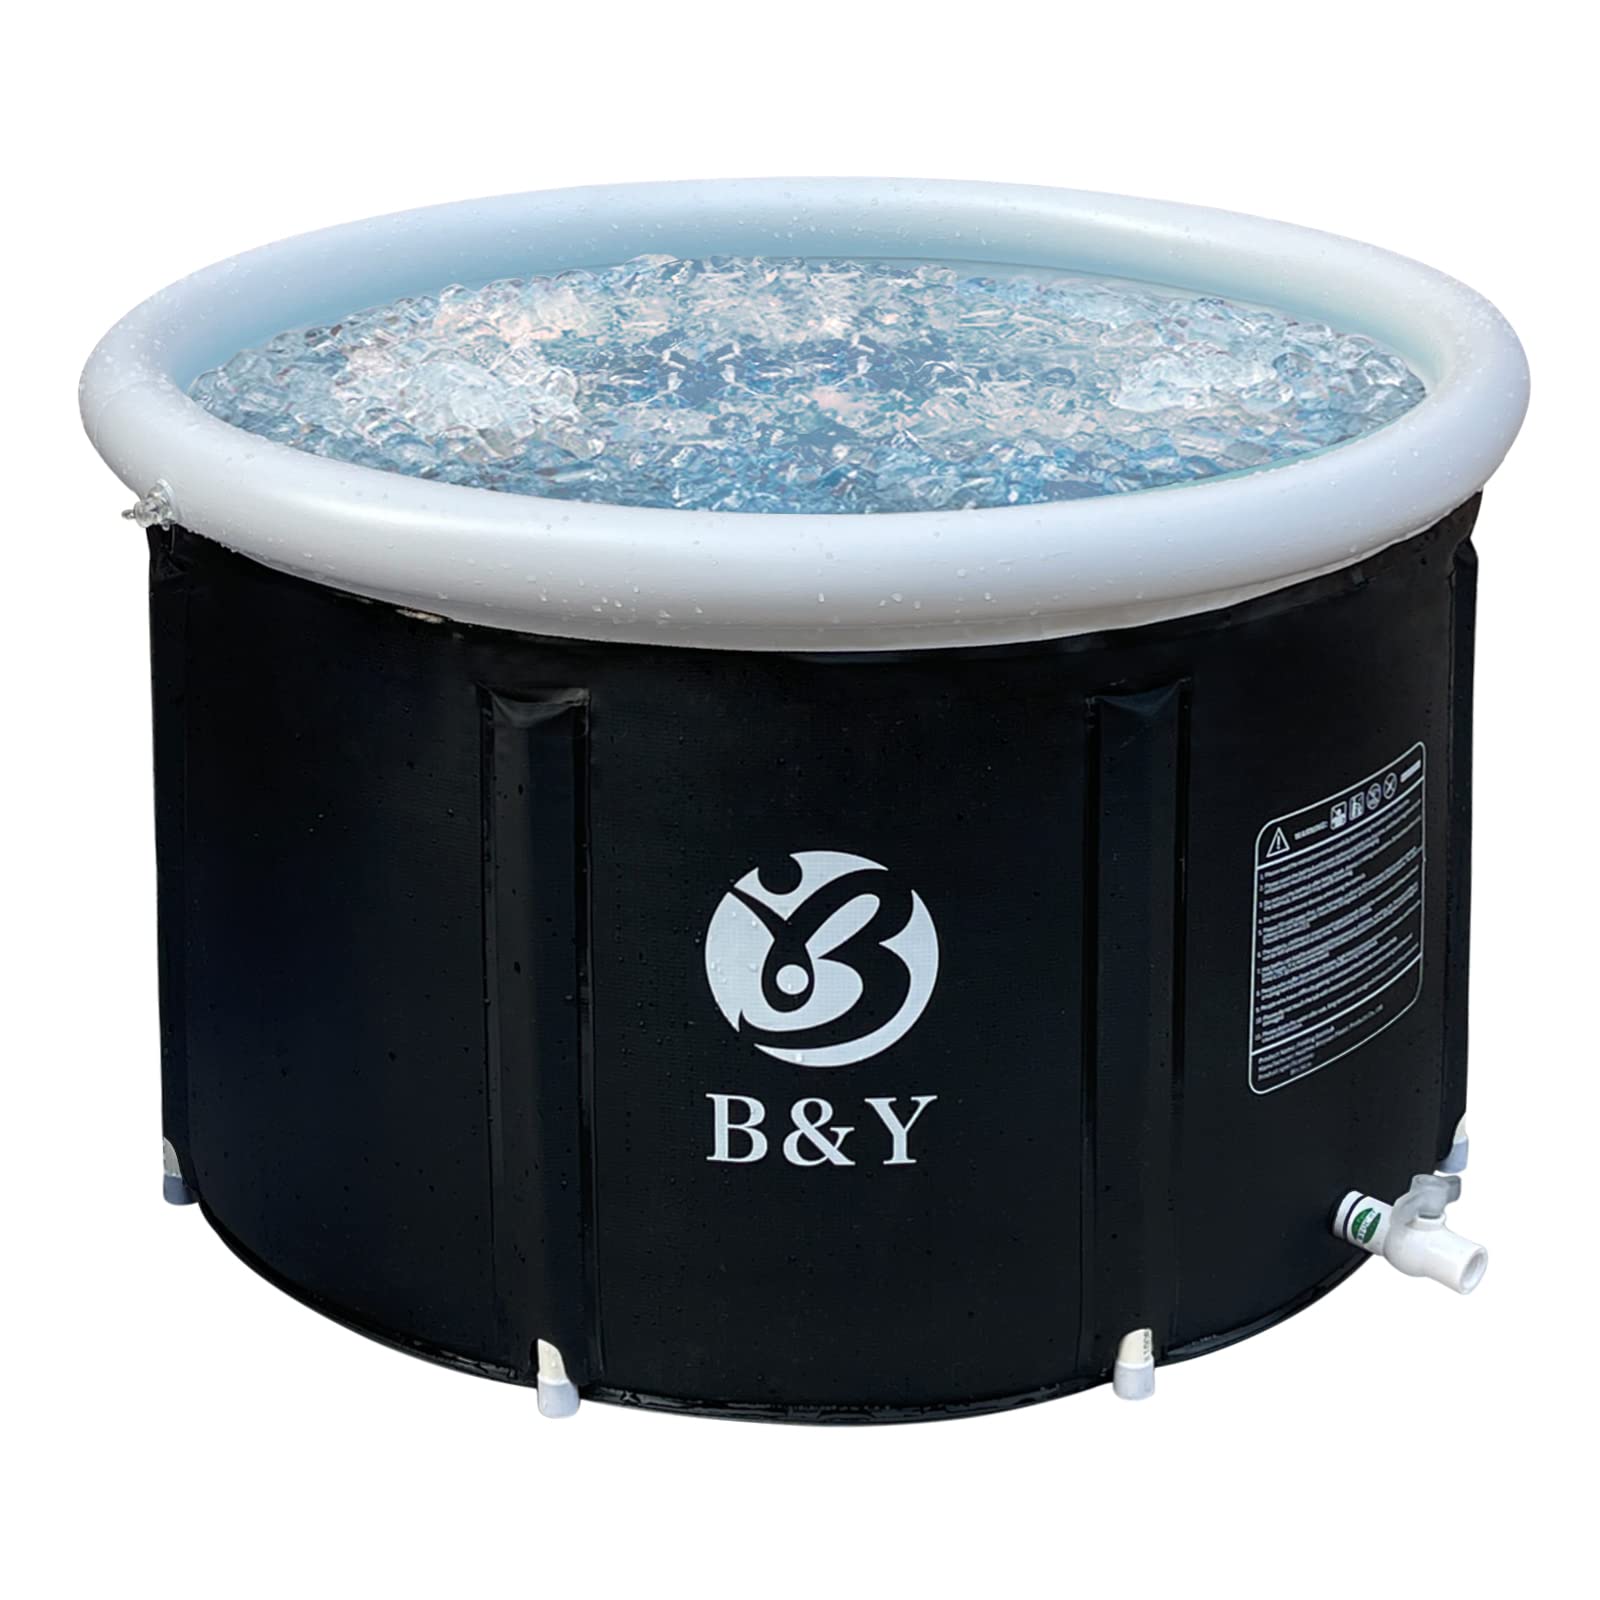 B&Y Ice Bath Tub for Athletes, Cold Plunge Tub, Portable Bathtub for Adults Outdoor Inflatable Ice Barrel Home Shower Hot/Cold Bath Freestanding Soaking Tub (Black 35''x 21.6'')